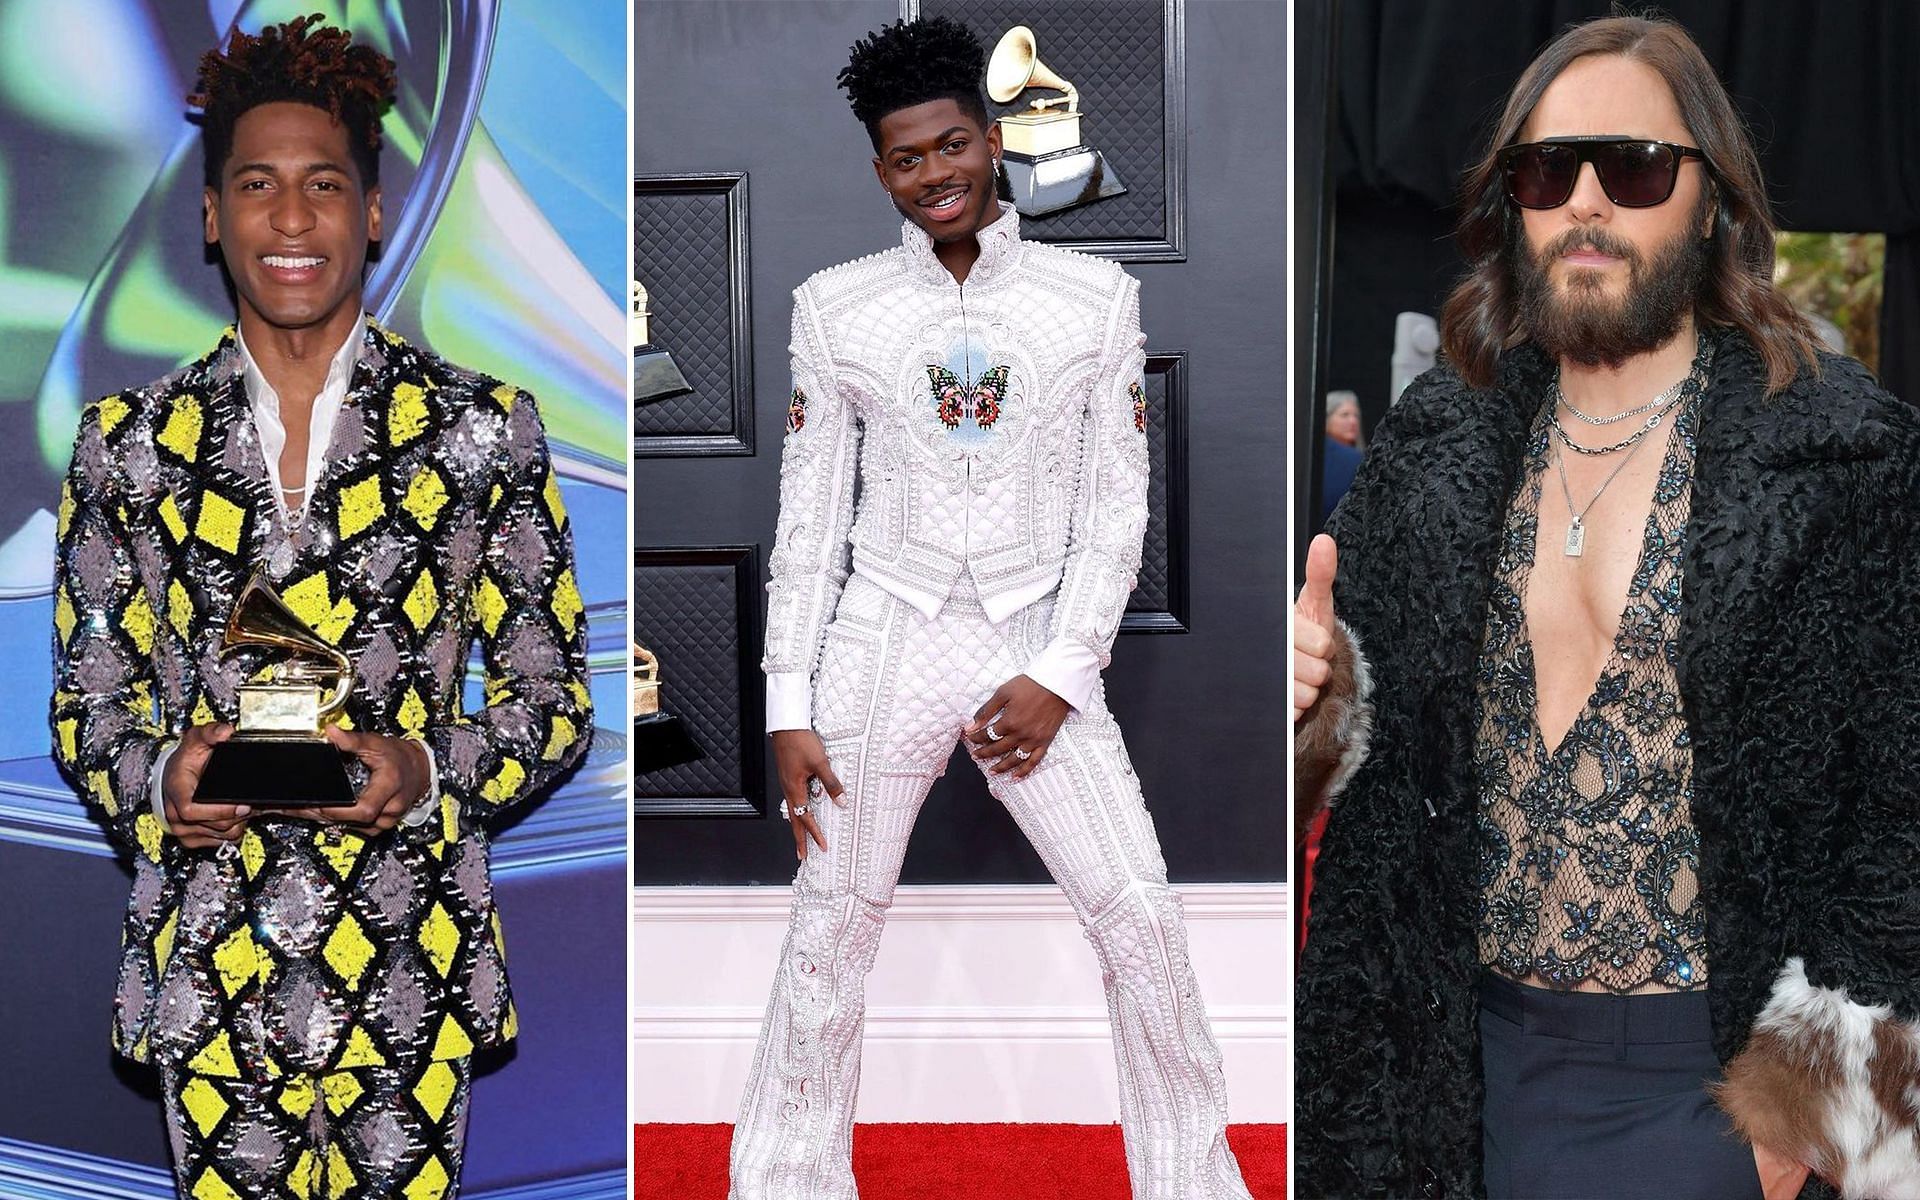 Best Jewelry From The Men At The 2022 Grammy Awards – Who Wore What Jewels